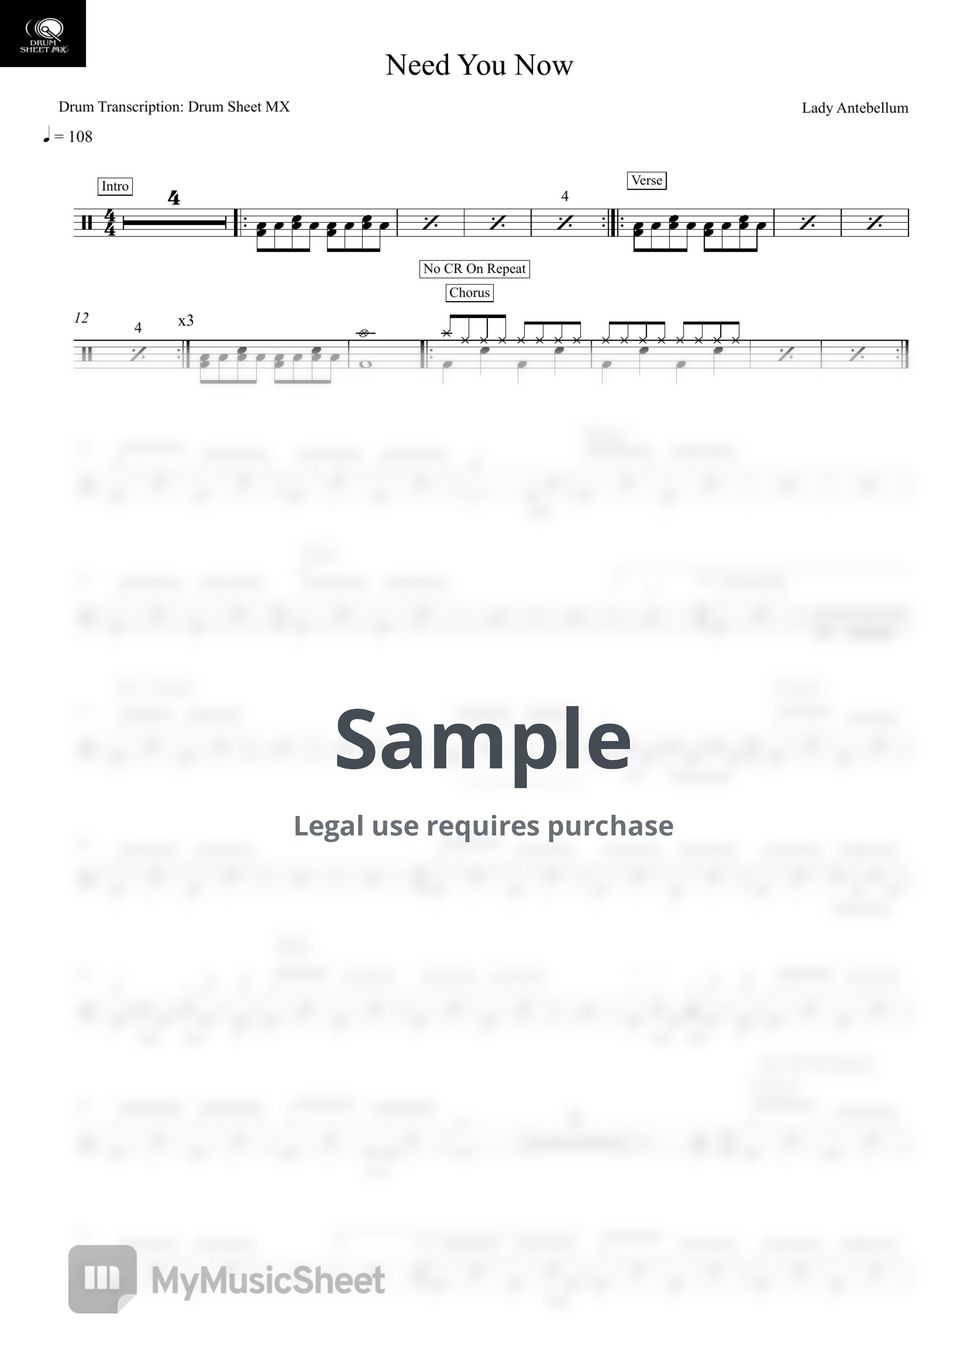 Lady Antebellum - Need You Now by Drum Transcription: Drum Sheet MX